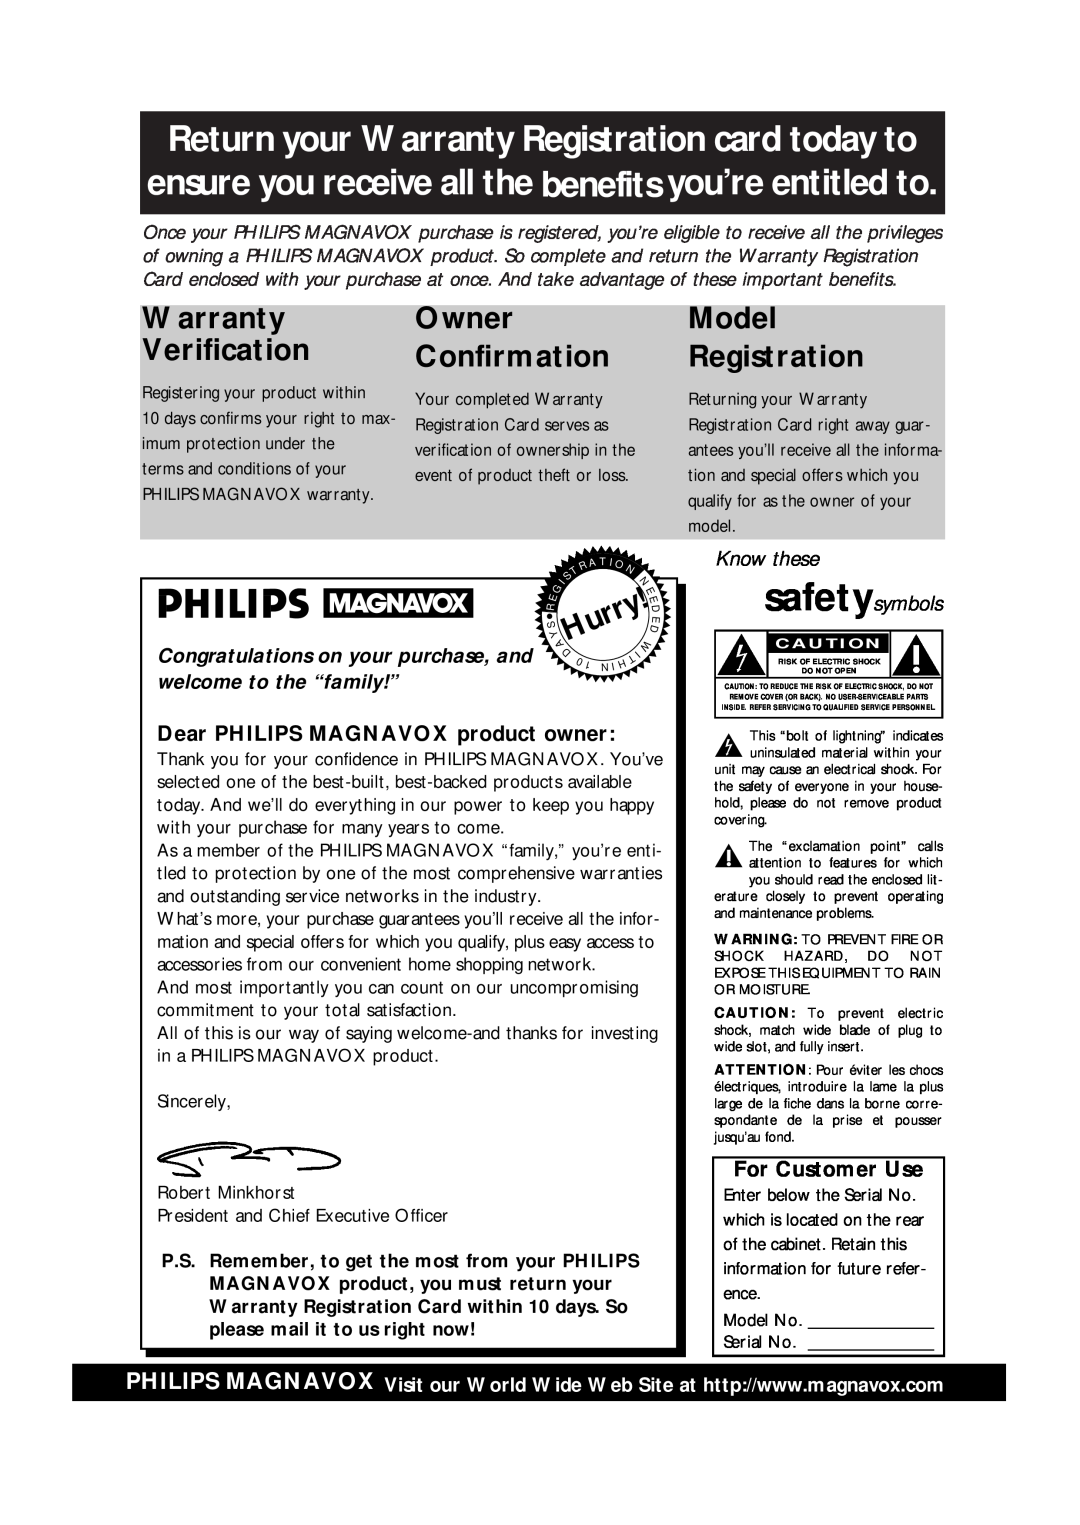 Philips VRX562AT warranty AHurry, Warranty Verification, Owner Confirmation, Model Registration, Know these safetysymbols 